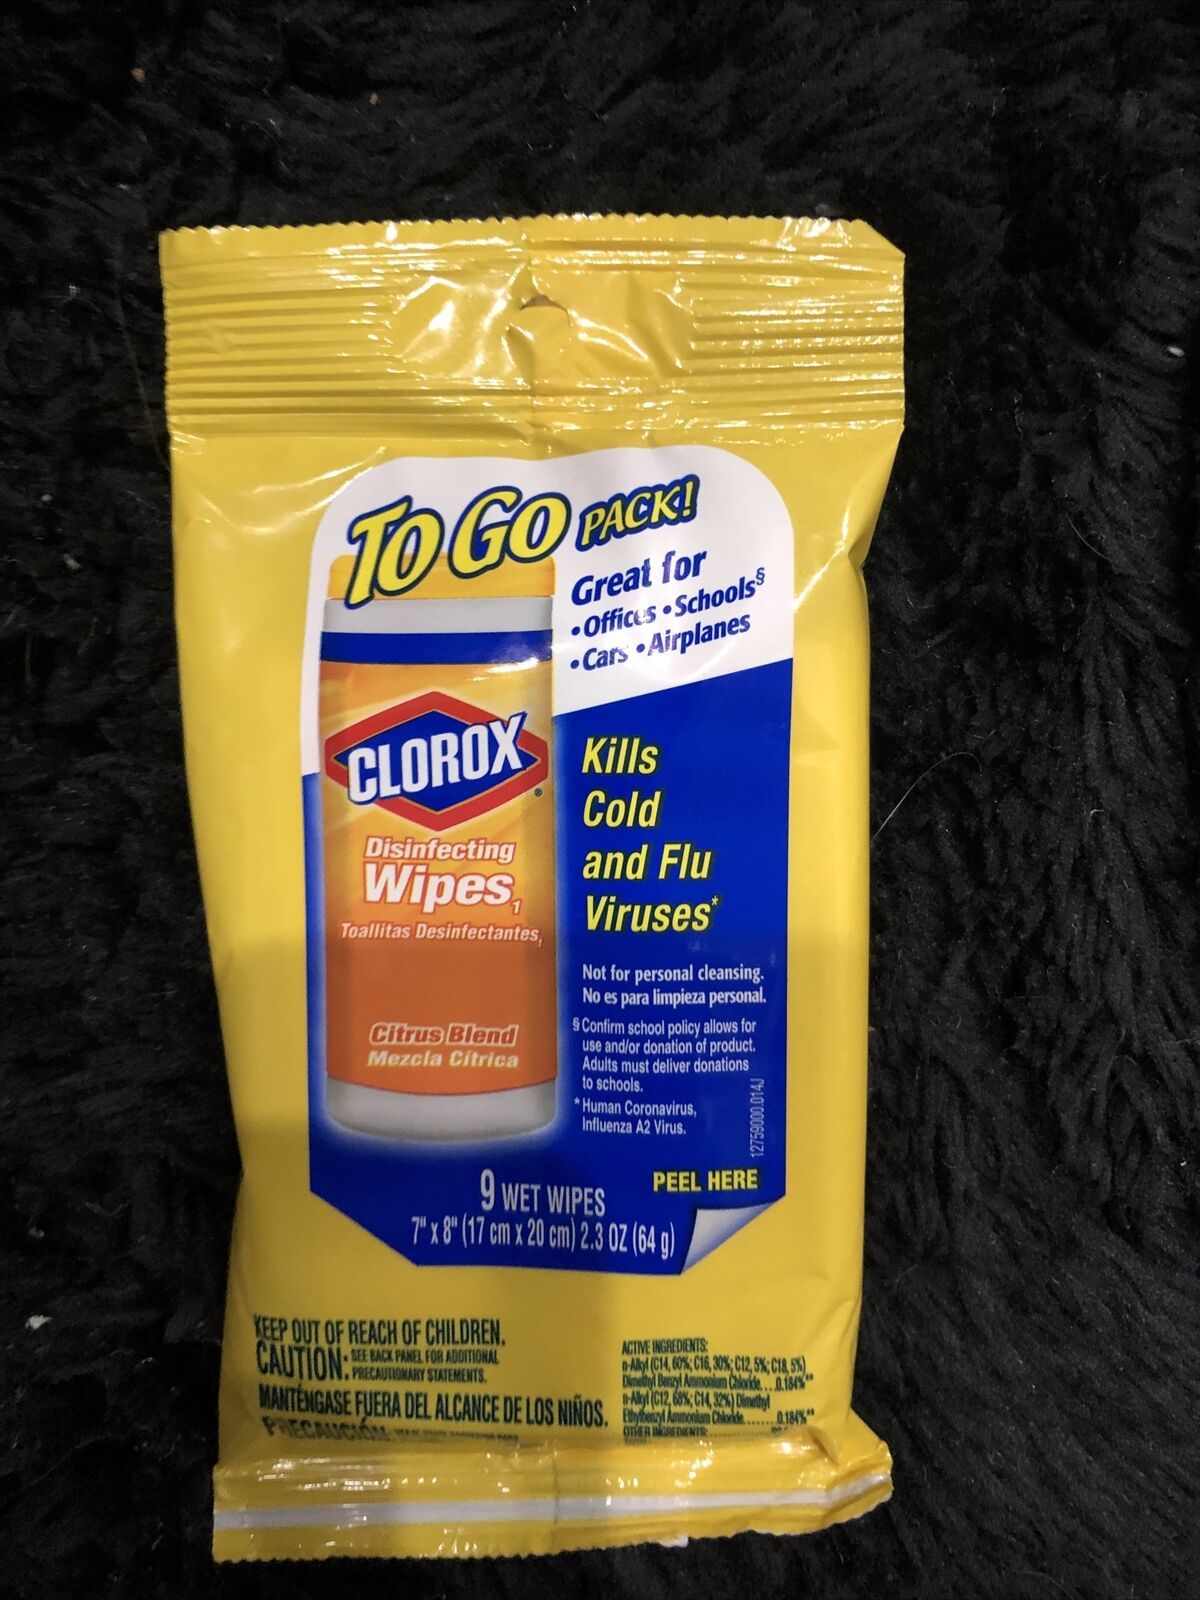 One 9ct Clorox To Go Pack Of Wipes Citrus Blend Scent 7x8 Kills 99.9% Germs